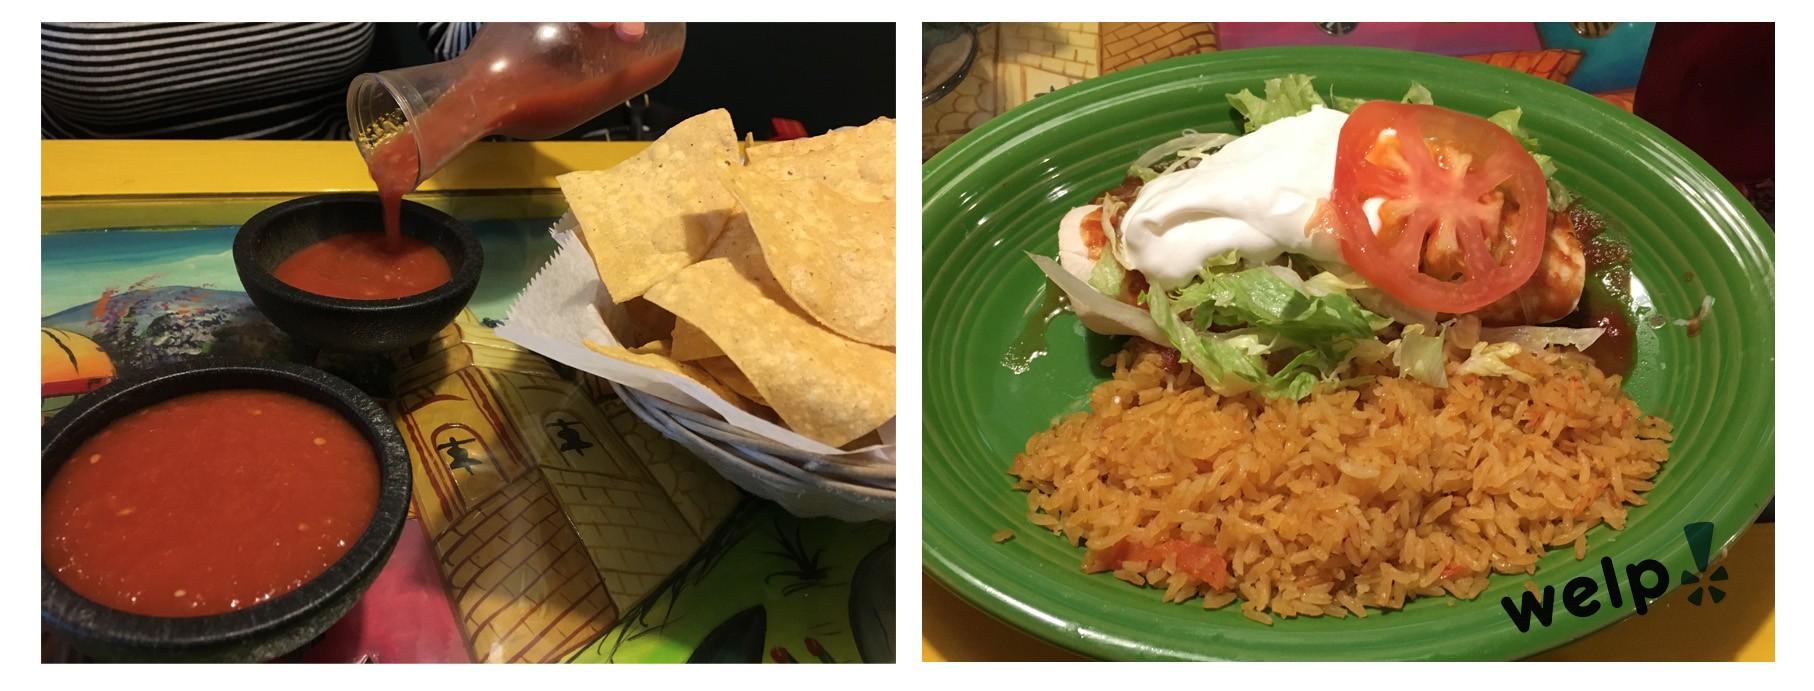 Left: totally good salsa, Right: burrito deluxe lunch portion